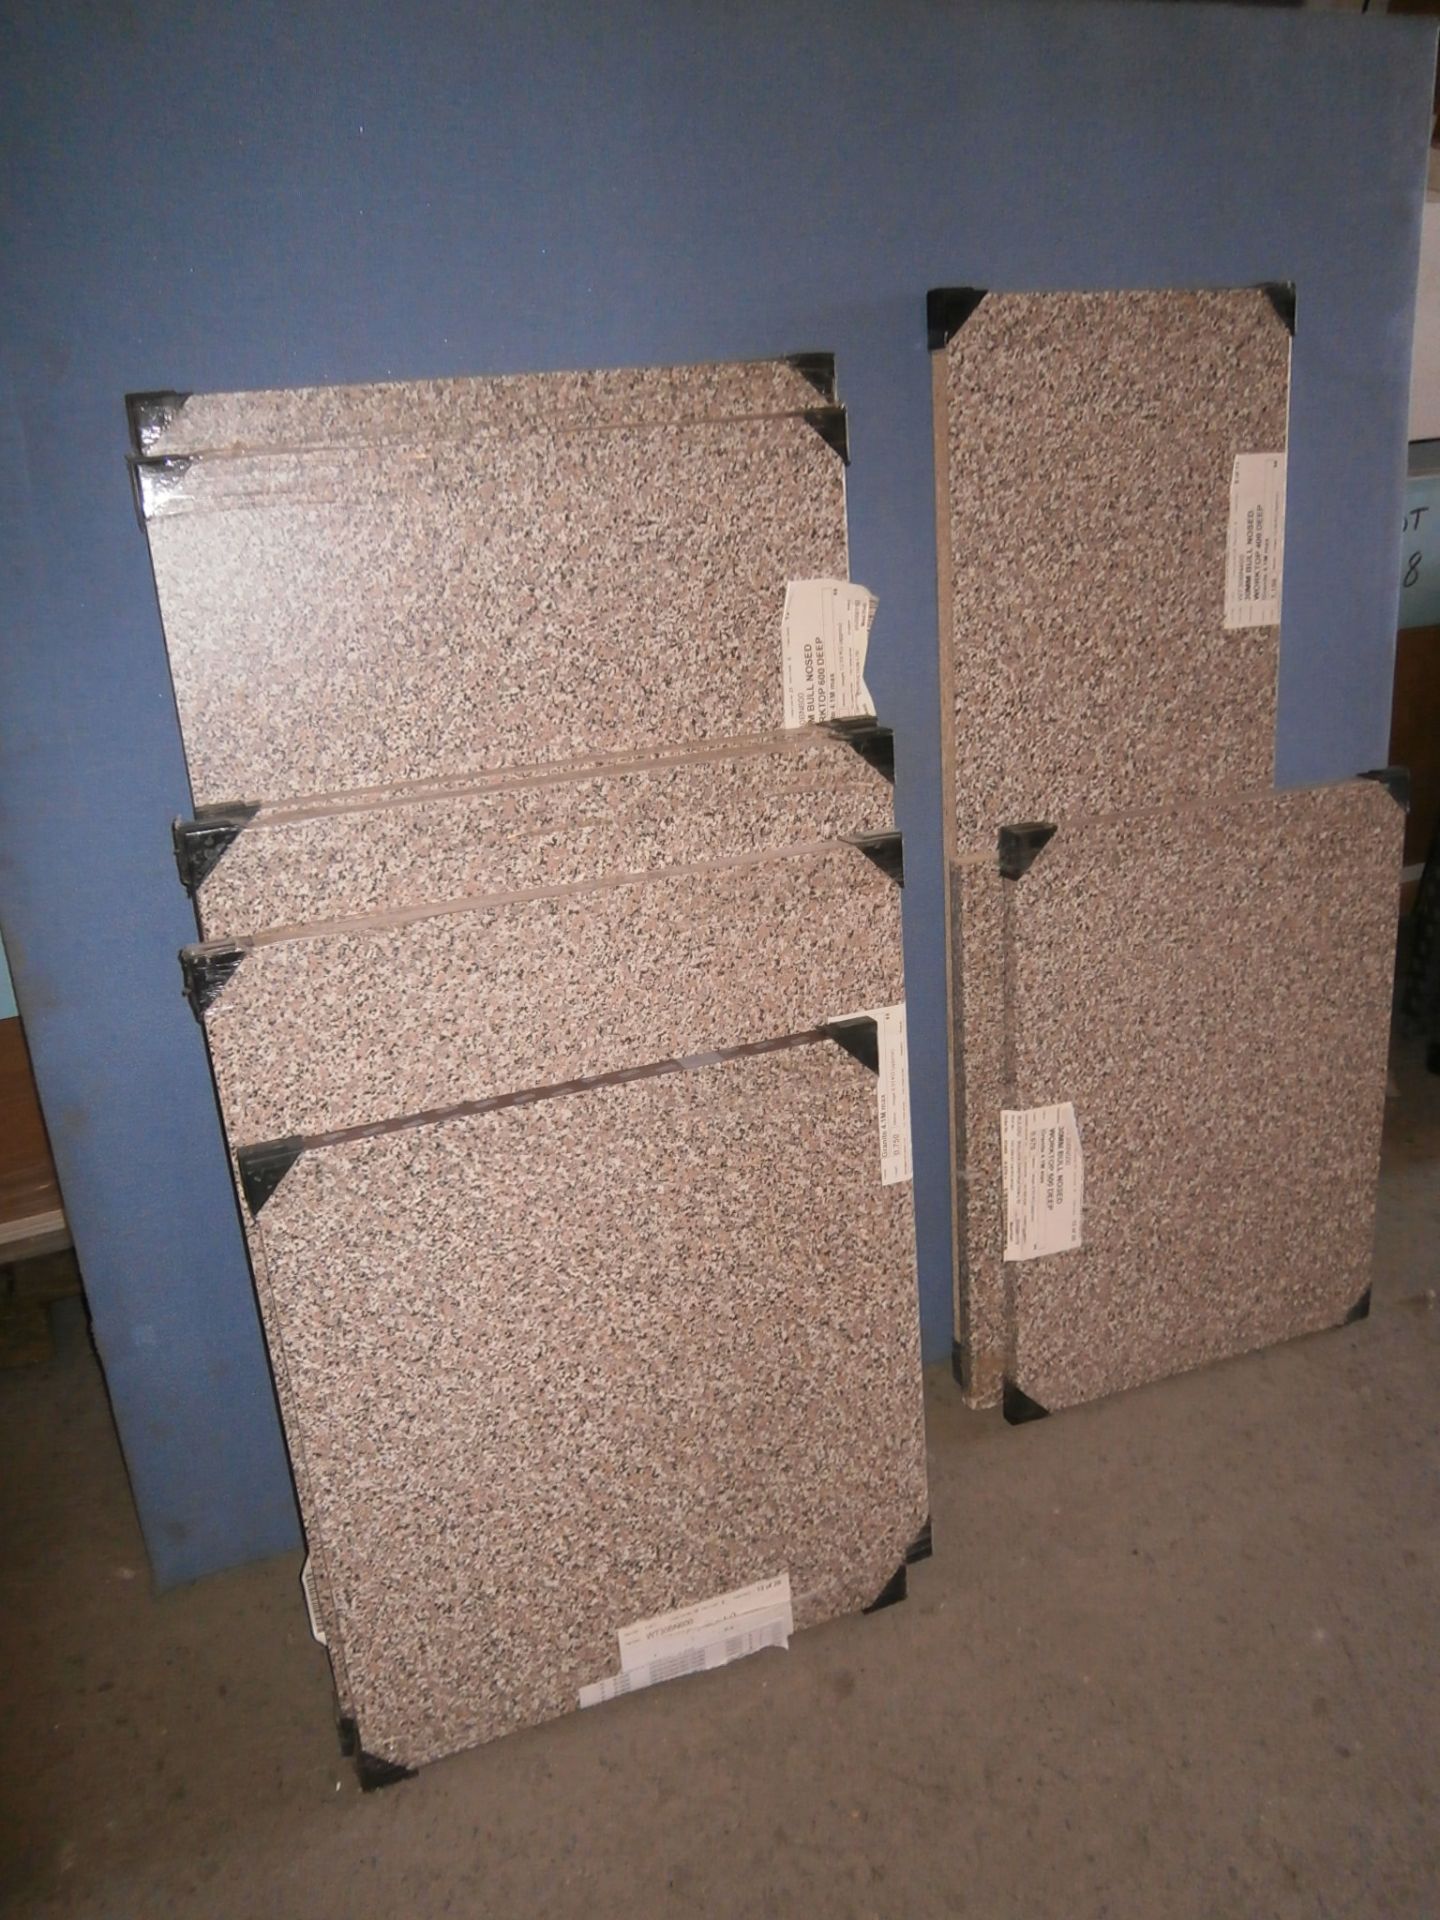 Job Lot of New Granite Coloured Kitchen Worktops (Various Sizes - Approximately 12 Pieces in Total)